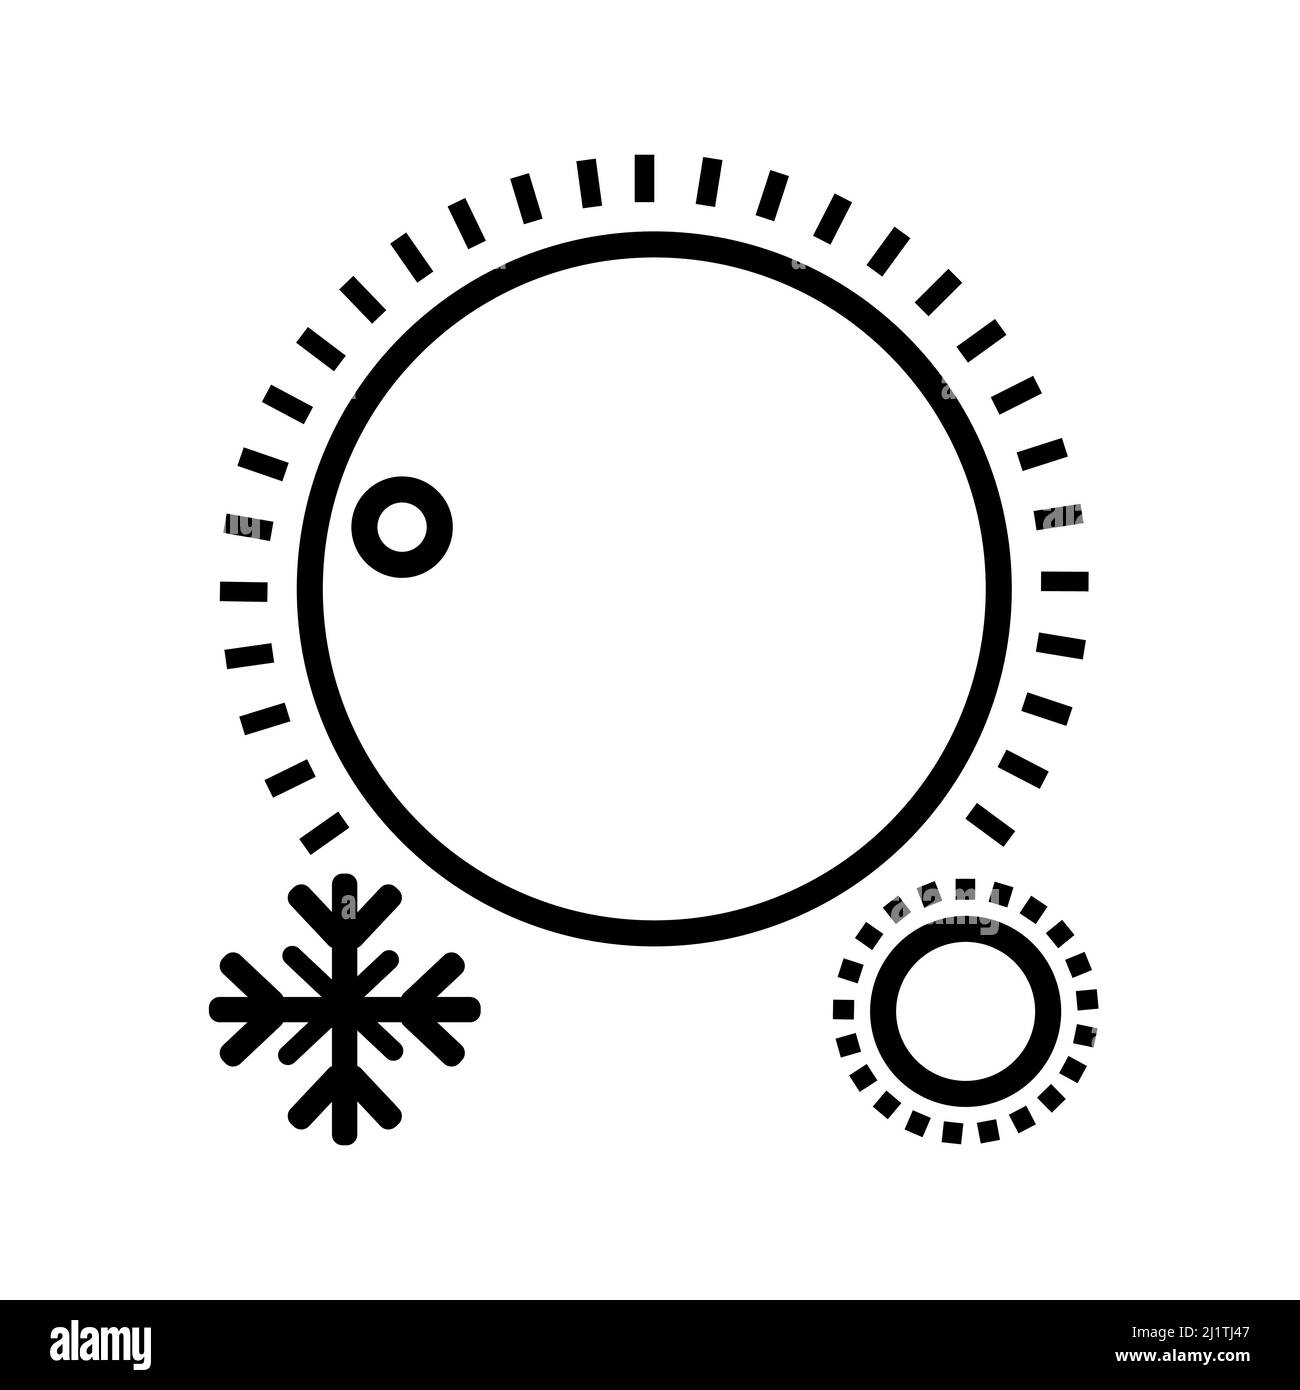 Temperature control equipment. Abstract vector icon on the white, Illustration isolated for graphic and web design. Simple flat symbol. Stock Vector